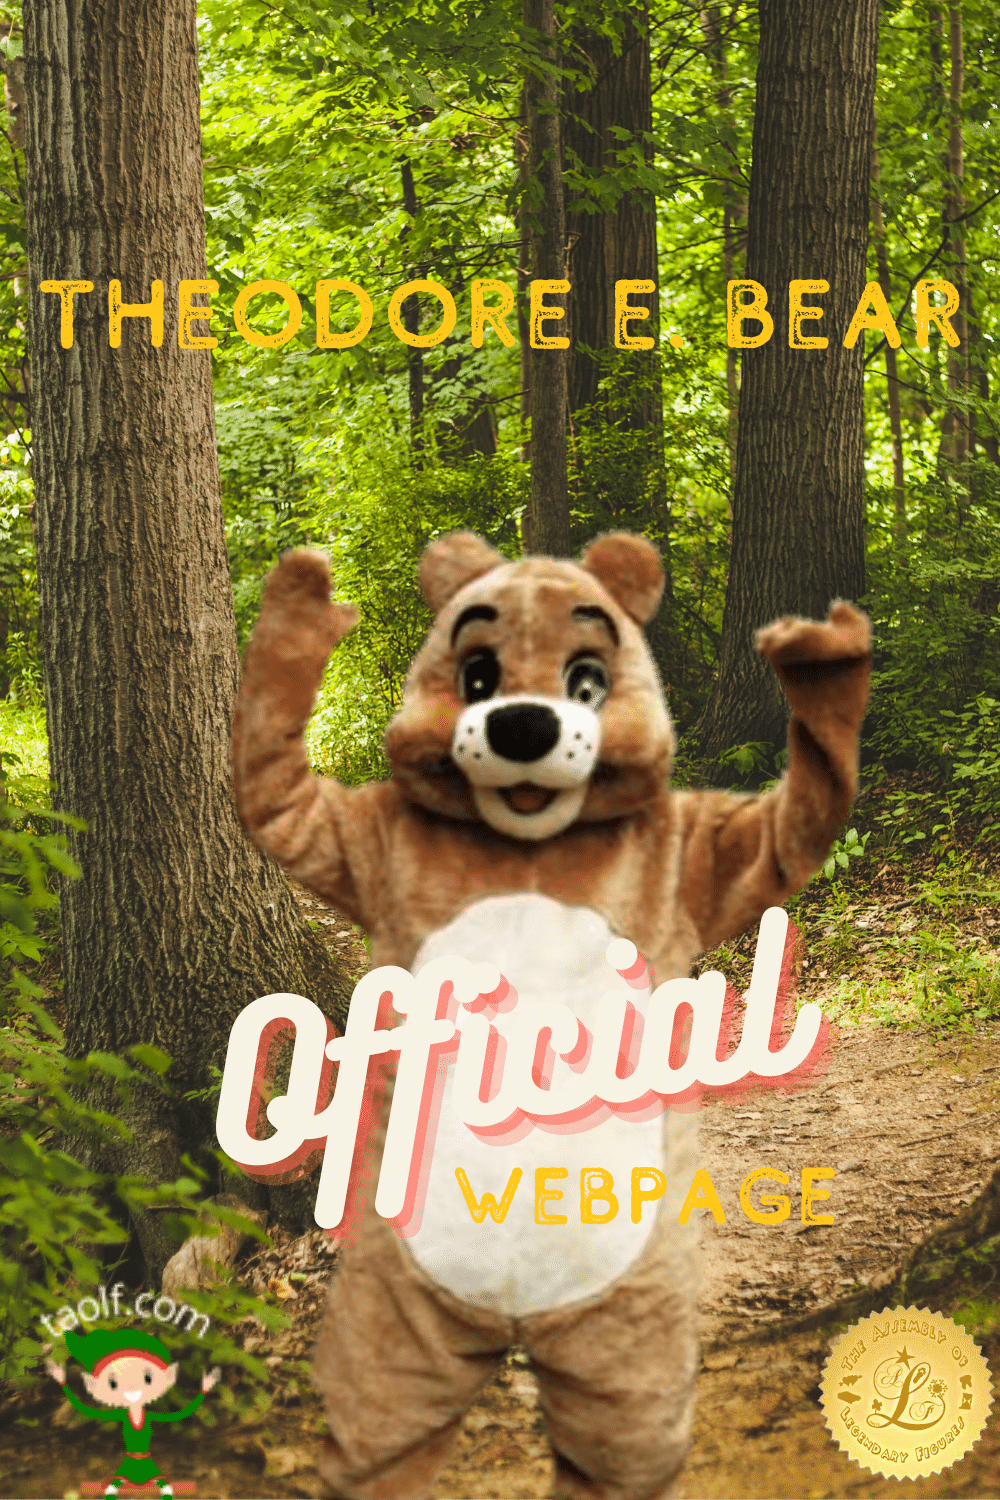 Theodore E. Bear - Protecting the Forests